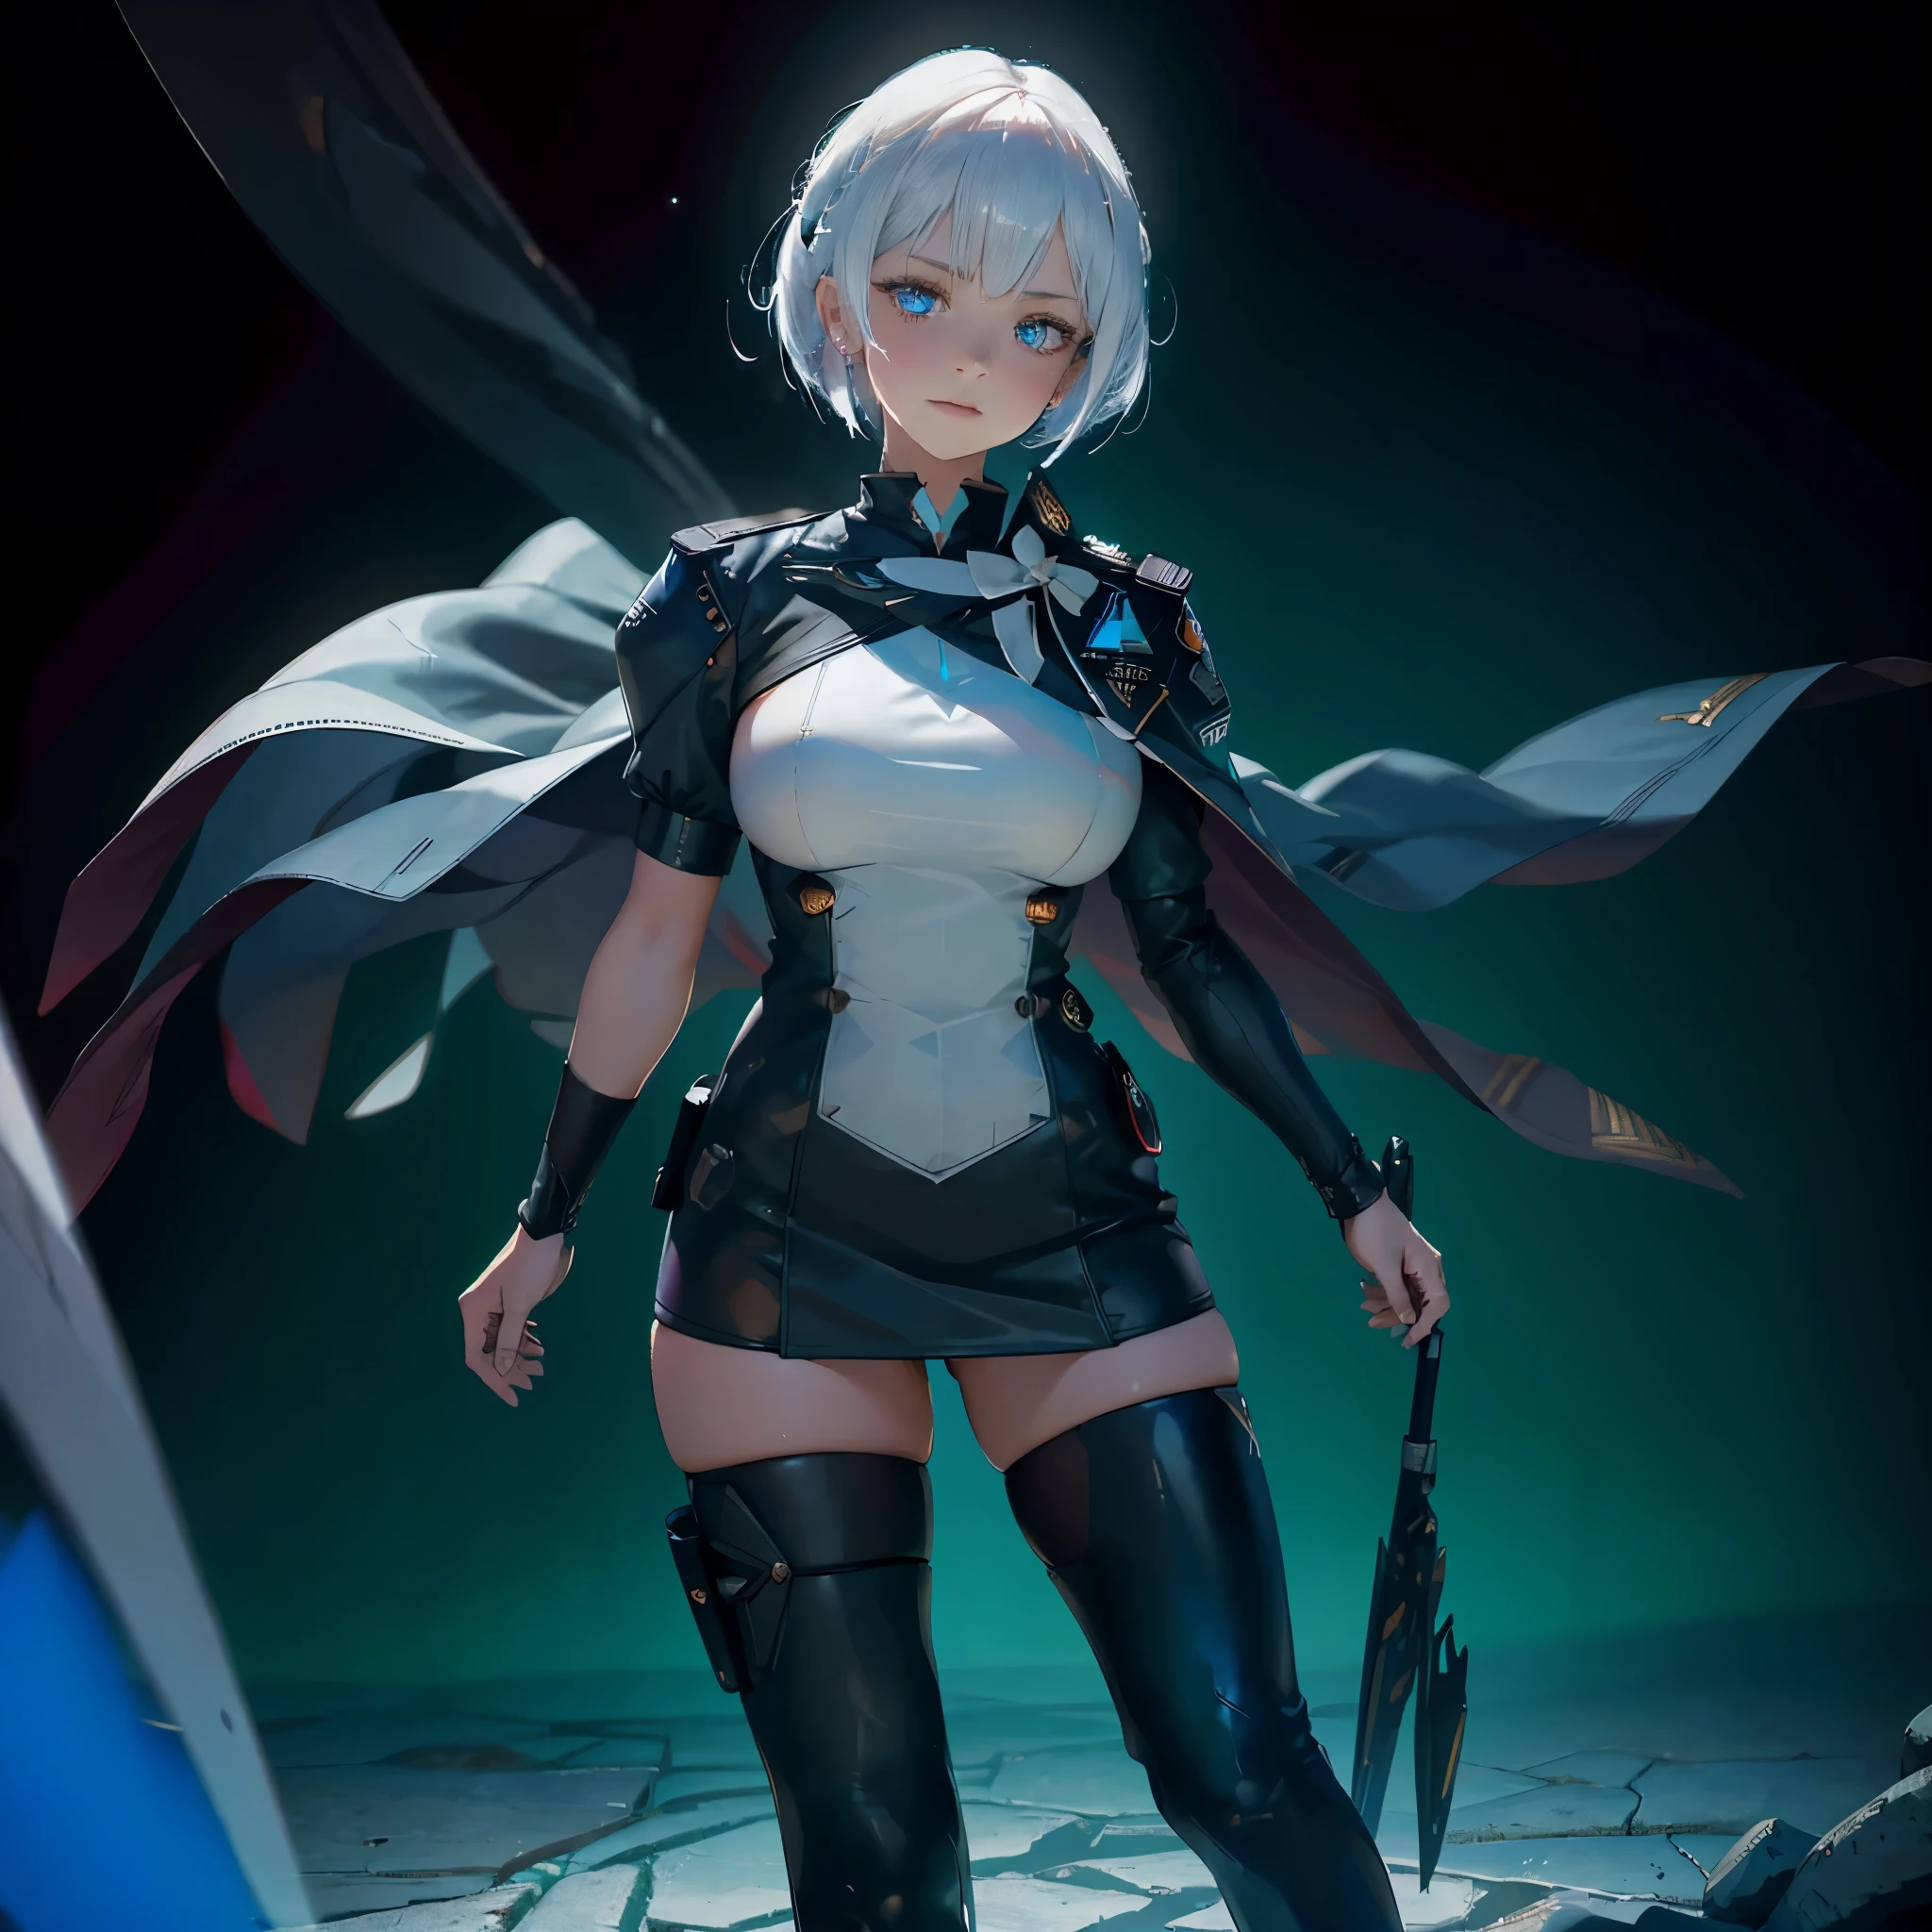 1 Girl, Solo , Alone, A Single Person, Face Close Up, Big Chest, Violet Eyes, mecha , Clothing , mechasuit , armed girl ,mecha_musume , mecha girl , Hair accessories, White Bob Hair, Short Hair, Silver Hair, Bang, hair between eyes, military uniform, black dress, cape, White gloves, pantyhose, high heel boots, Explosion, Salute Pose, Standing, In the Sky, Blue Sky, ((Best quality)), ((masterpiece)), 3D, HDR (High Dynamic Range),Ray Tracing, NVIDIA RTX, Super-Resolution, Unreal 5,Subsurface scattering, PBR Texturing, Post-processing, Anisotropic Filtering, Depth-of-field, Maximum clarity and sharpness, Multi-layered textures, Albedo and Specular maps, Surface shading, Accurate simulation of light-material interaction, Perfect proportions, Octane Render, Two-tone lighting, Wide aperture, Low ISO, White balance, Rule of thirds,8K RAW, Aura, masterpiece, best quality, Mysterious expression, magical effects like sparkles or energy, flowing robes or enchanting attire, mechanic creatures or mystical background, rim lighting, side lighting, cinematic light, ultra high res, 8k uhd, film grain, best shadow, delicate, RAW, light particles, detailed skin texture, detailed cloth texture, beautiful face, (masterpiece)